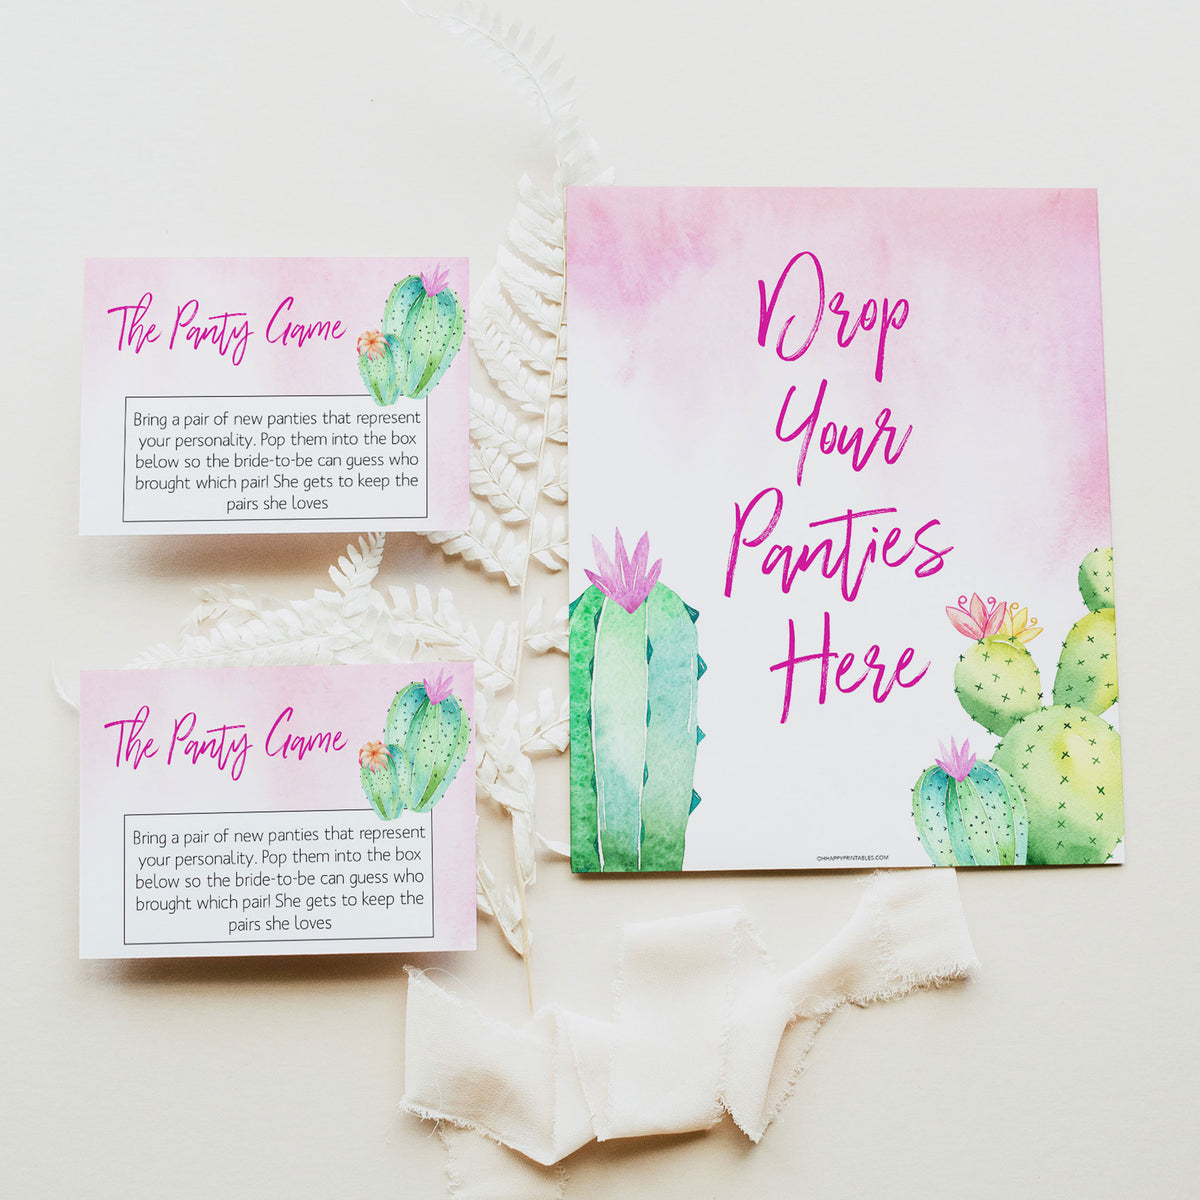 Bachelorette party game printable Drop your Panties, with a pink fiesta background and watercolour cactus design